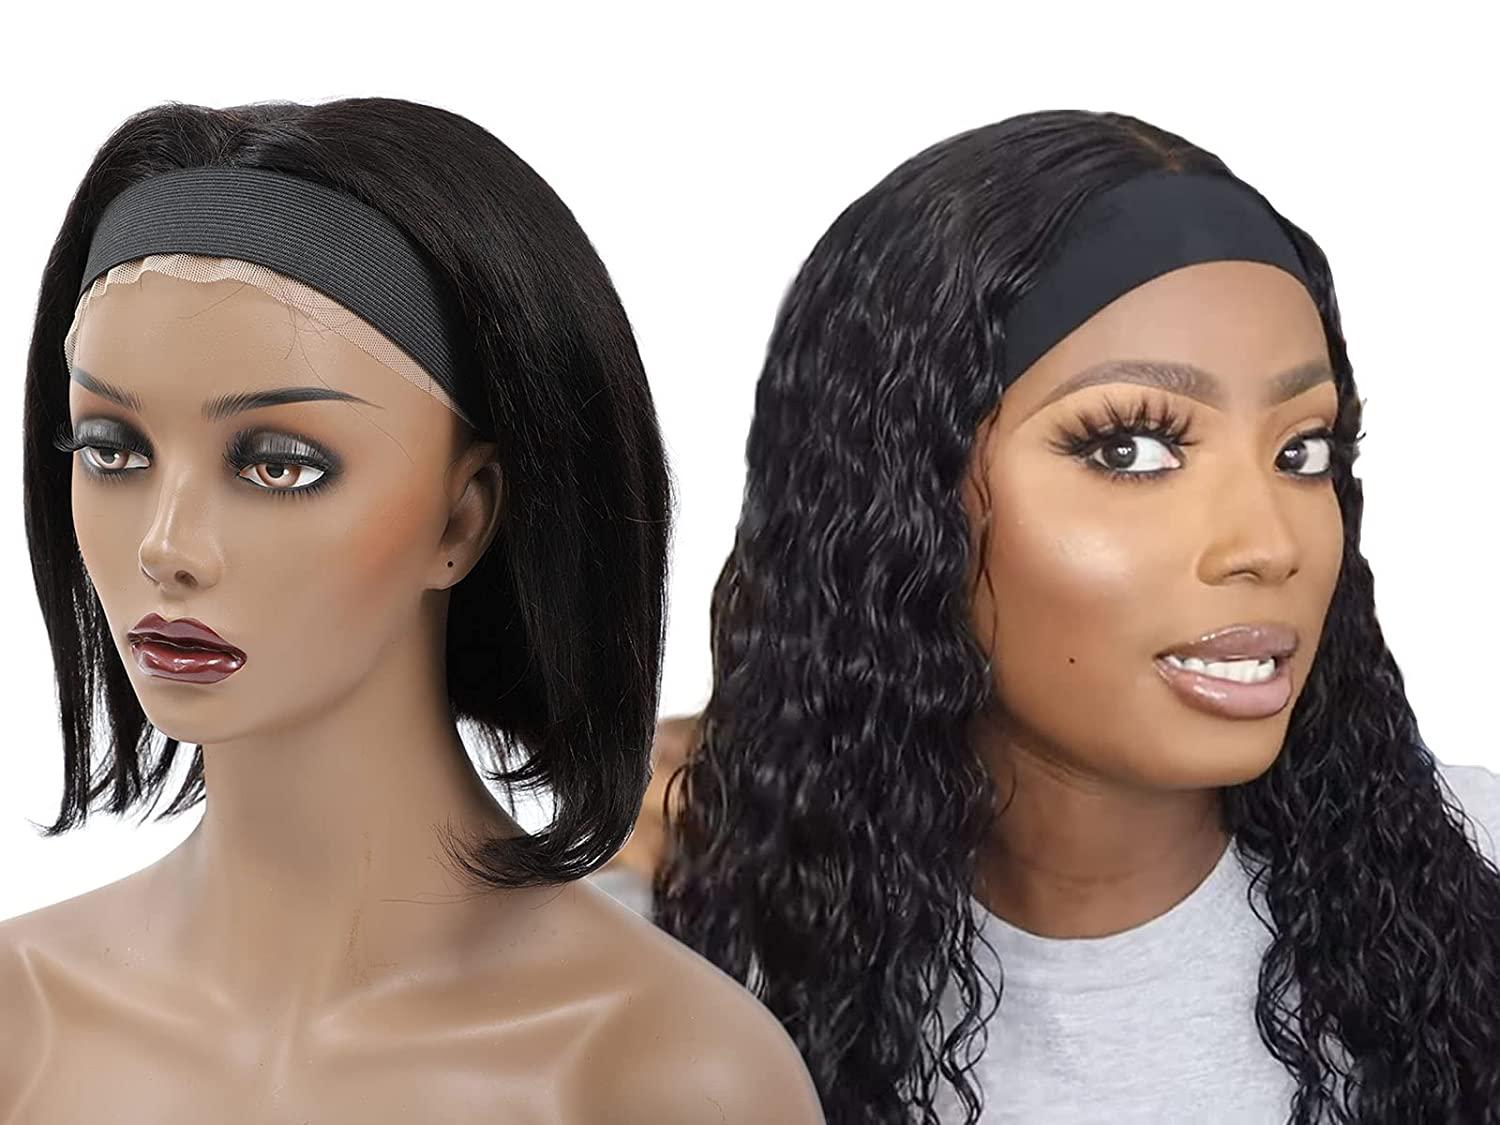 PIESOYRI Tall Wig Stands, Wig Head Stand for Long Wigs, 2 Pack